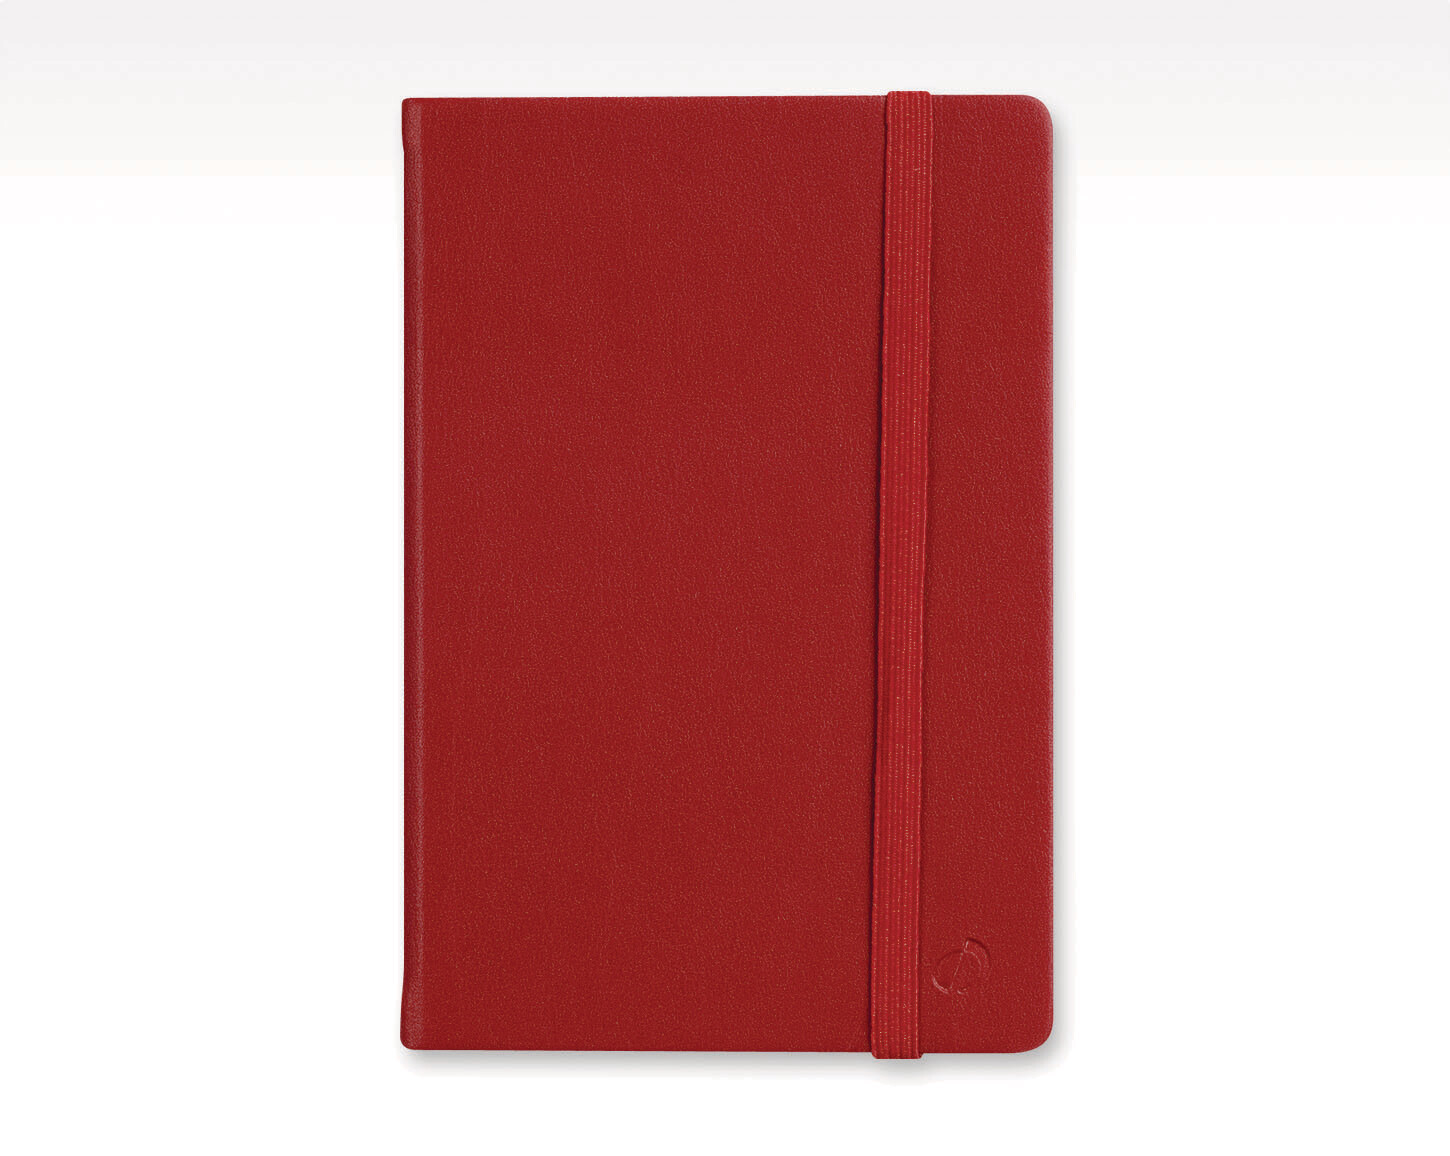 Notebook, Blank, A6 Red, 192 Pages, Habana